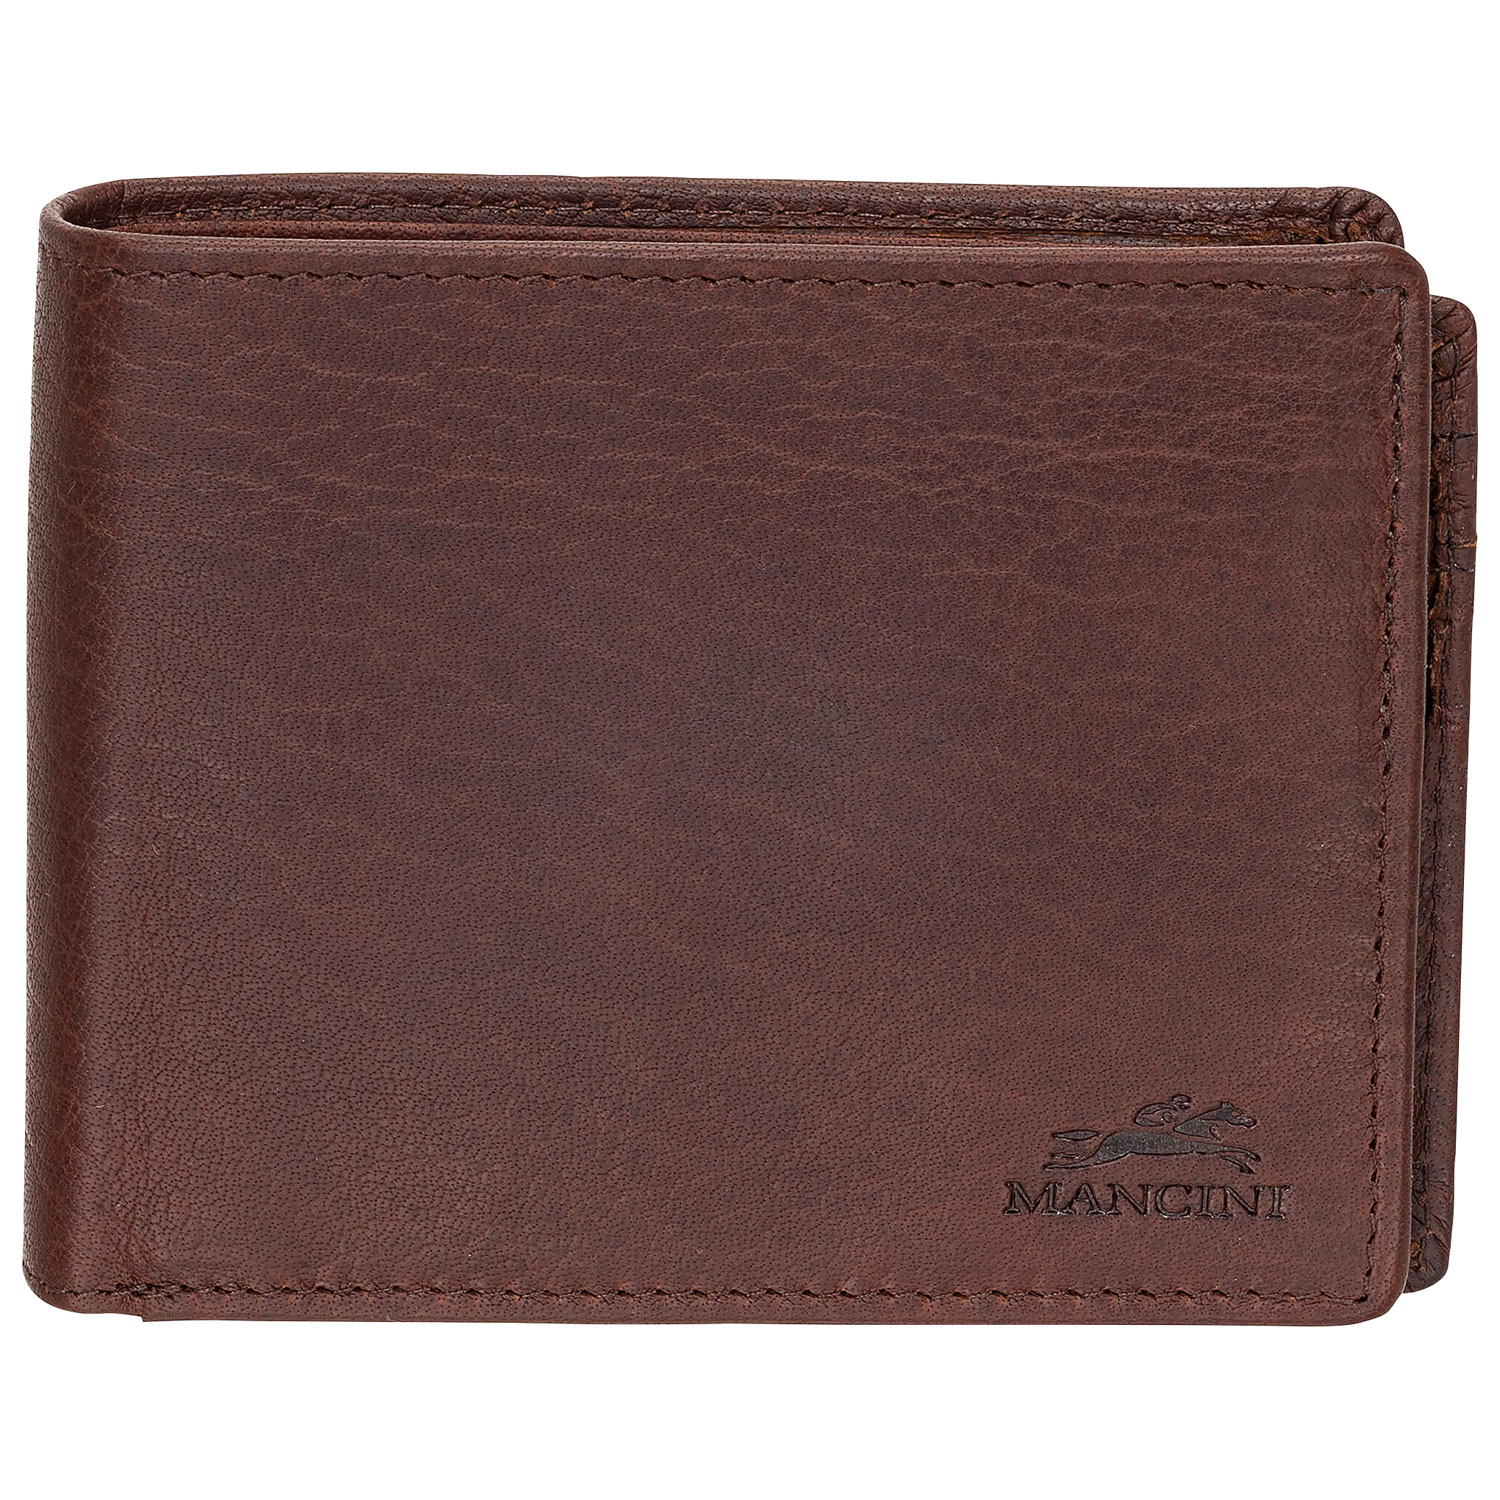 Mancini Buffalo RFID Genuine Leather Wallet with Zippered Coin Pocket - Brown